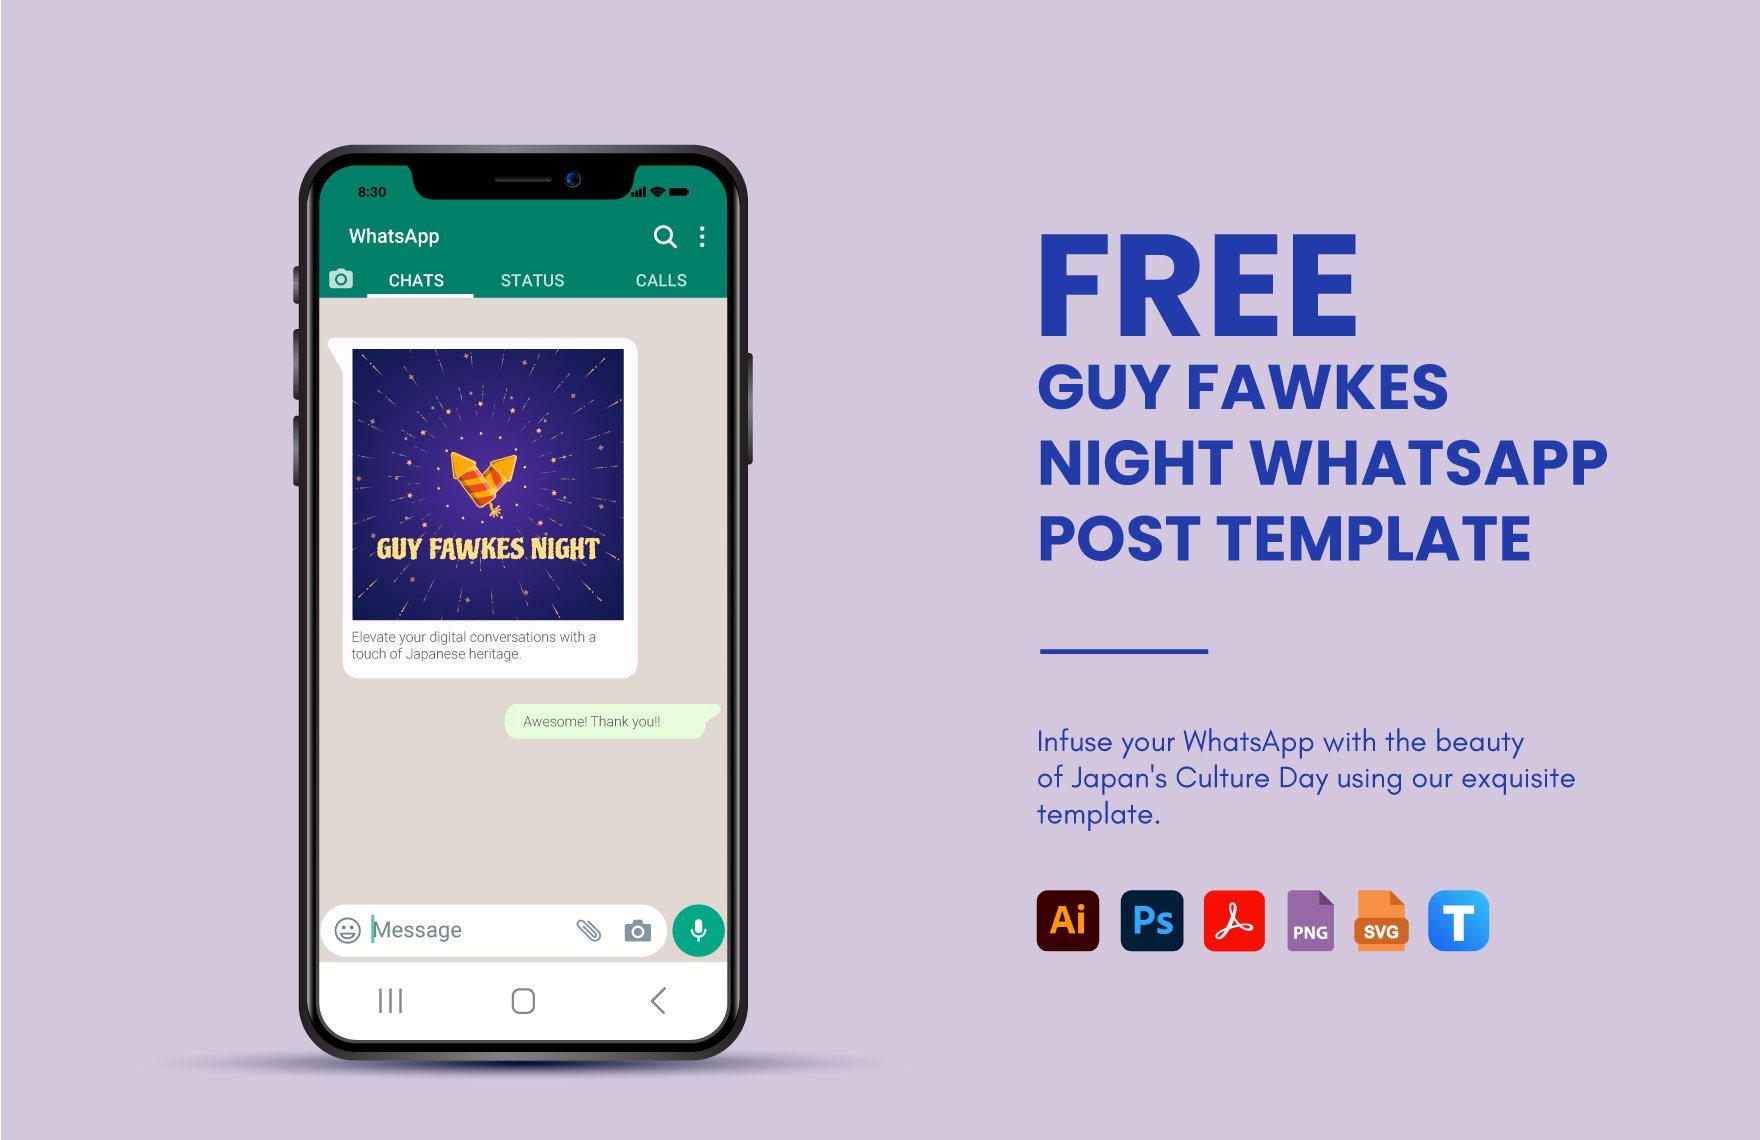 Free Guy Fawkes Night WhatsApp Post Template in PDF, Illustrator, PSD, SVG, PNG